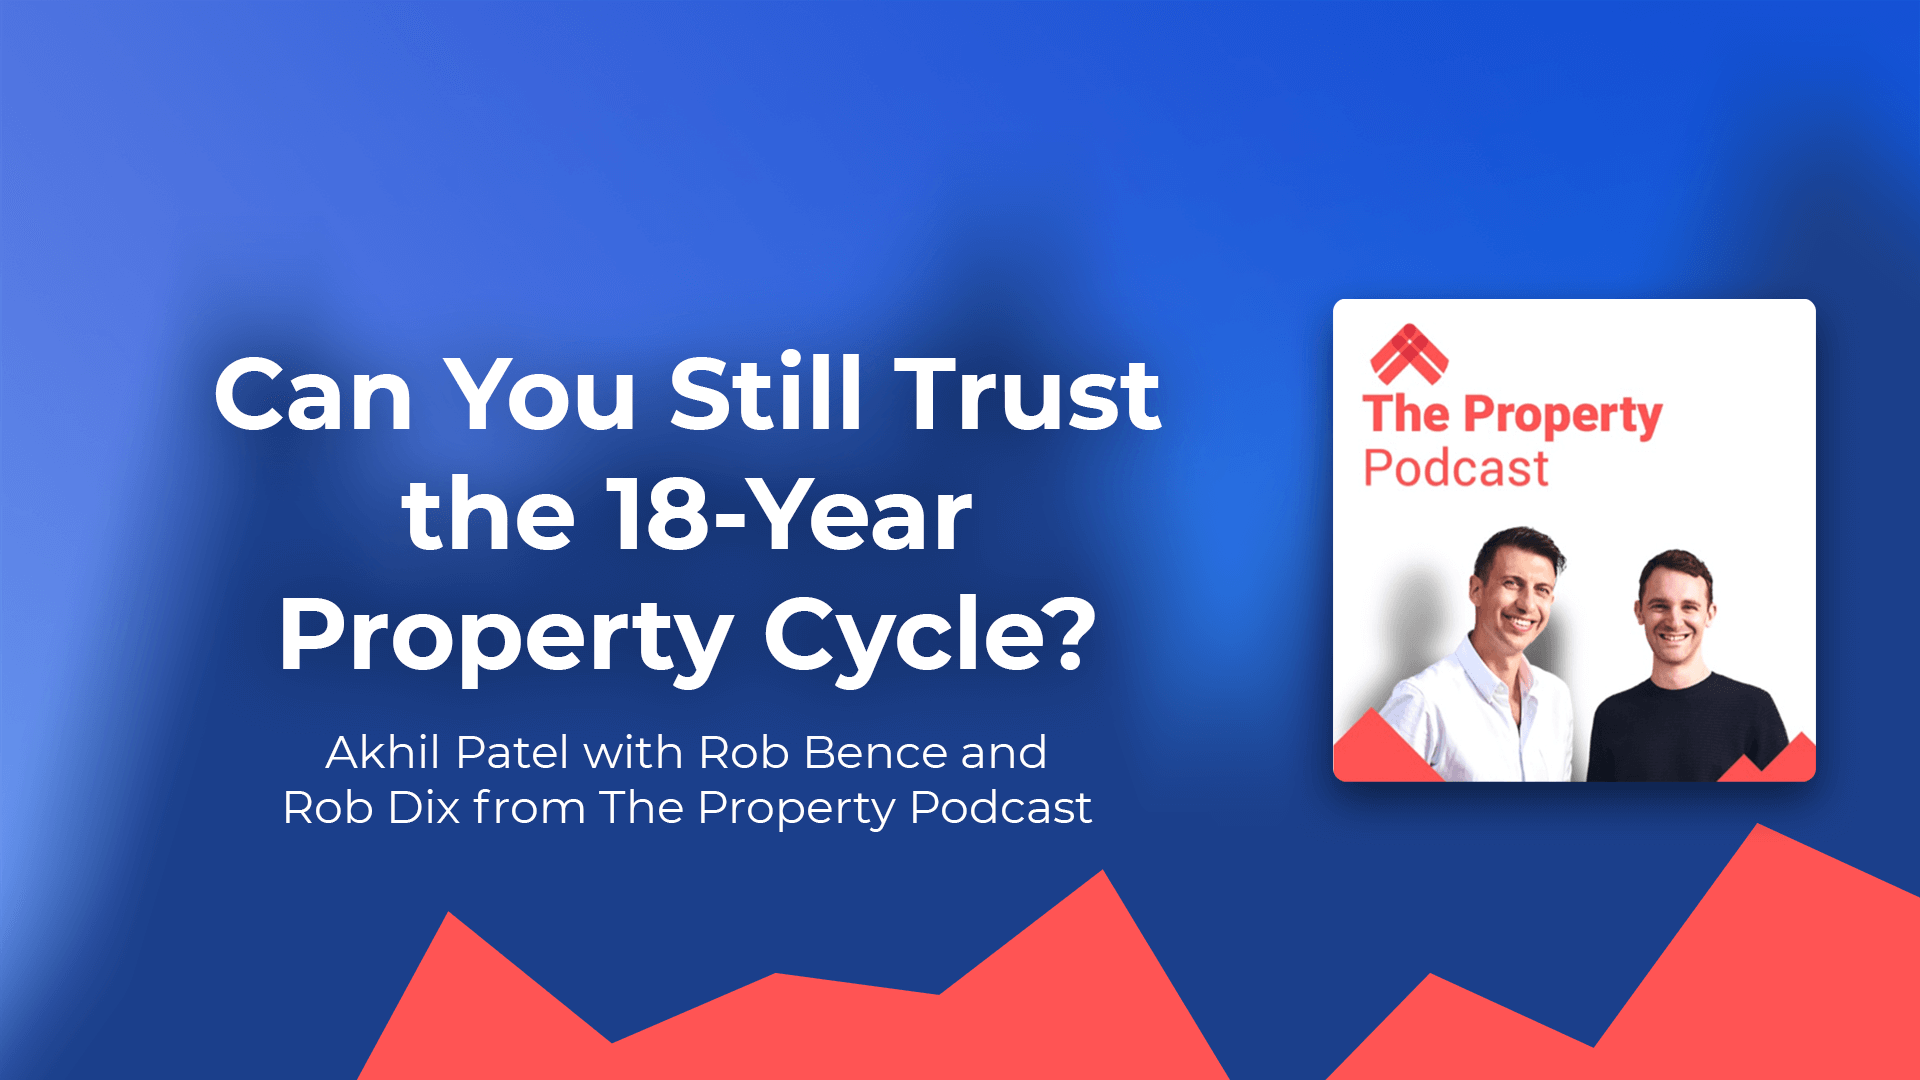 Can you still trust the Property Cycle